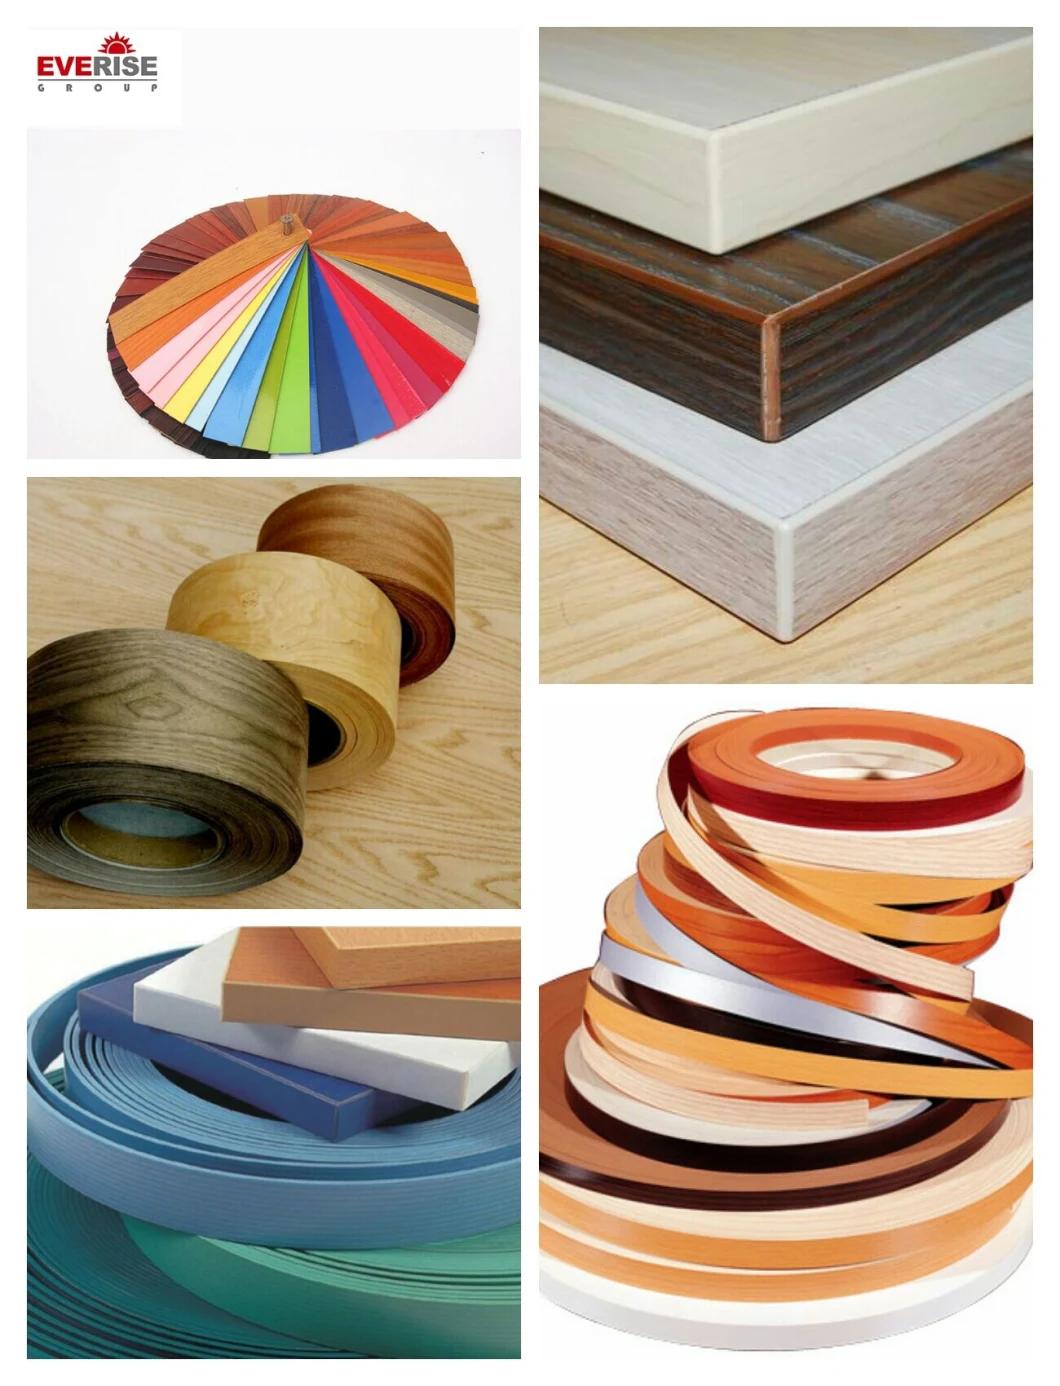 Indoor and Outdoor PVC Edge Banding for Furniture Packaging